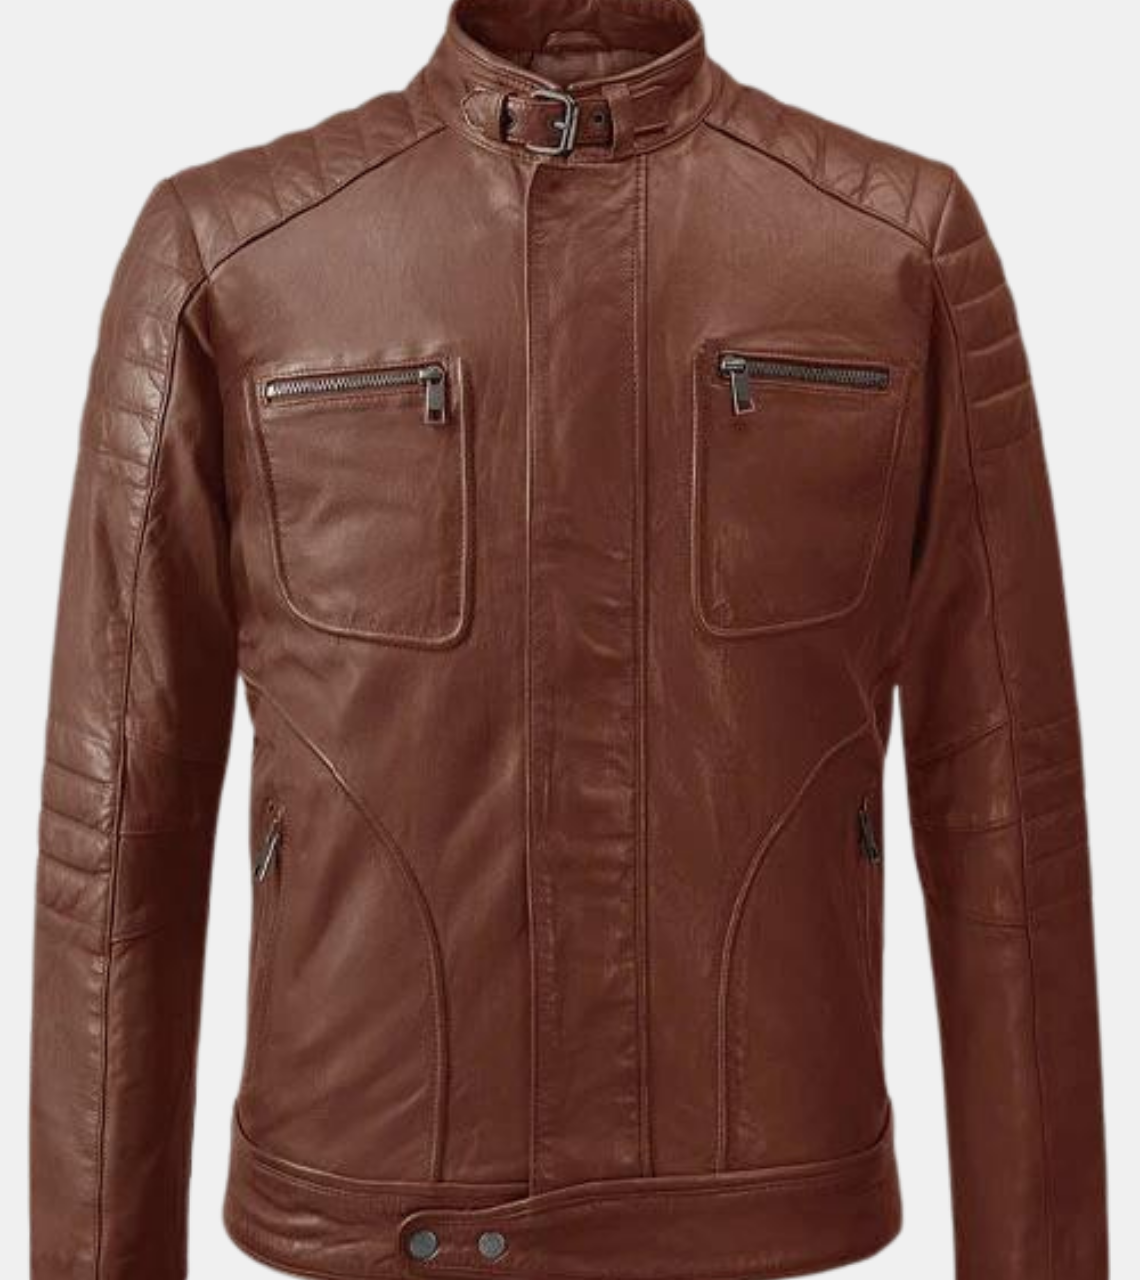 Lorenzo Men's Tan Brown Quilted Leather Jacket